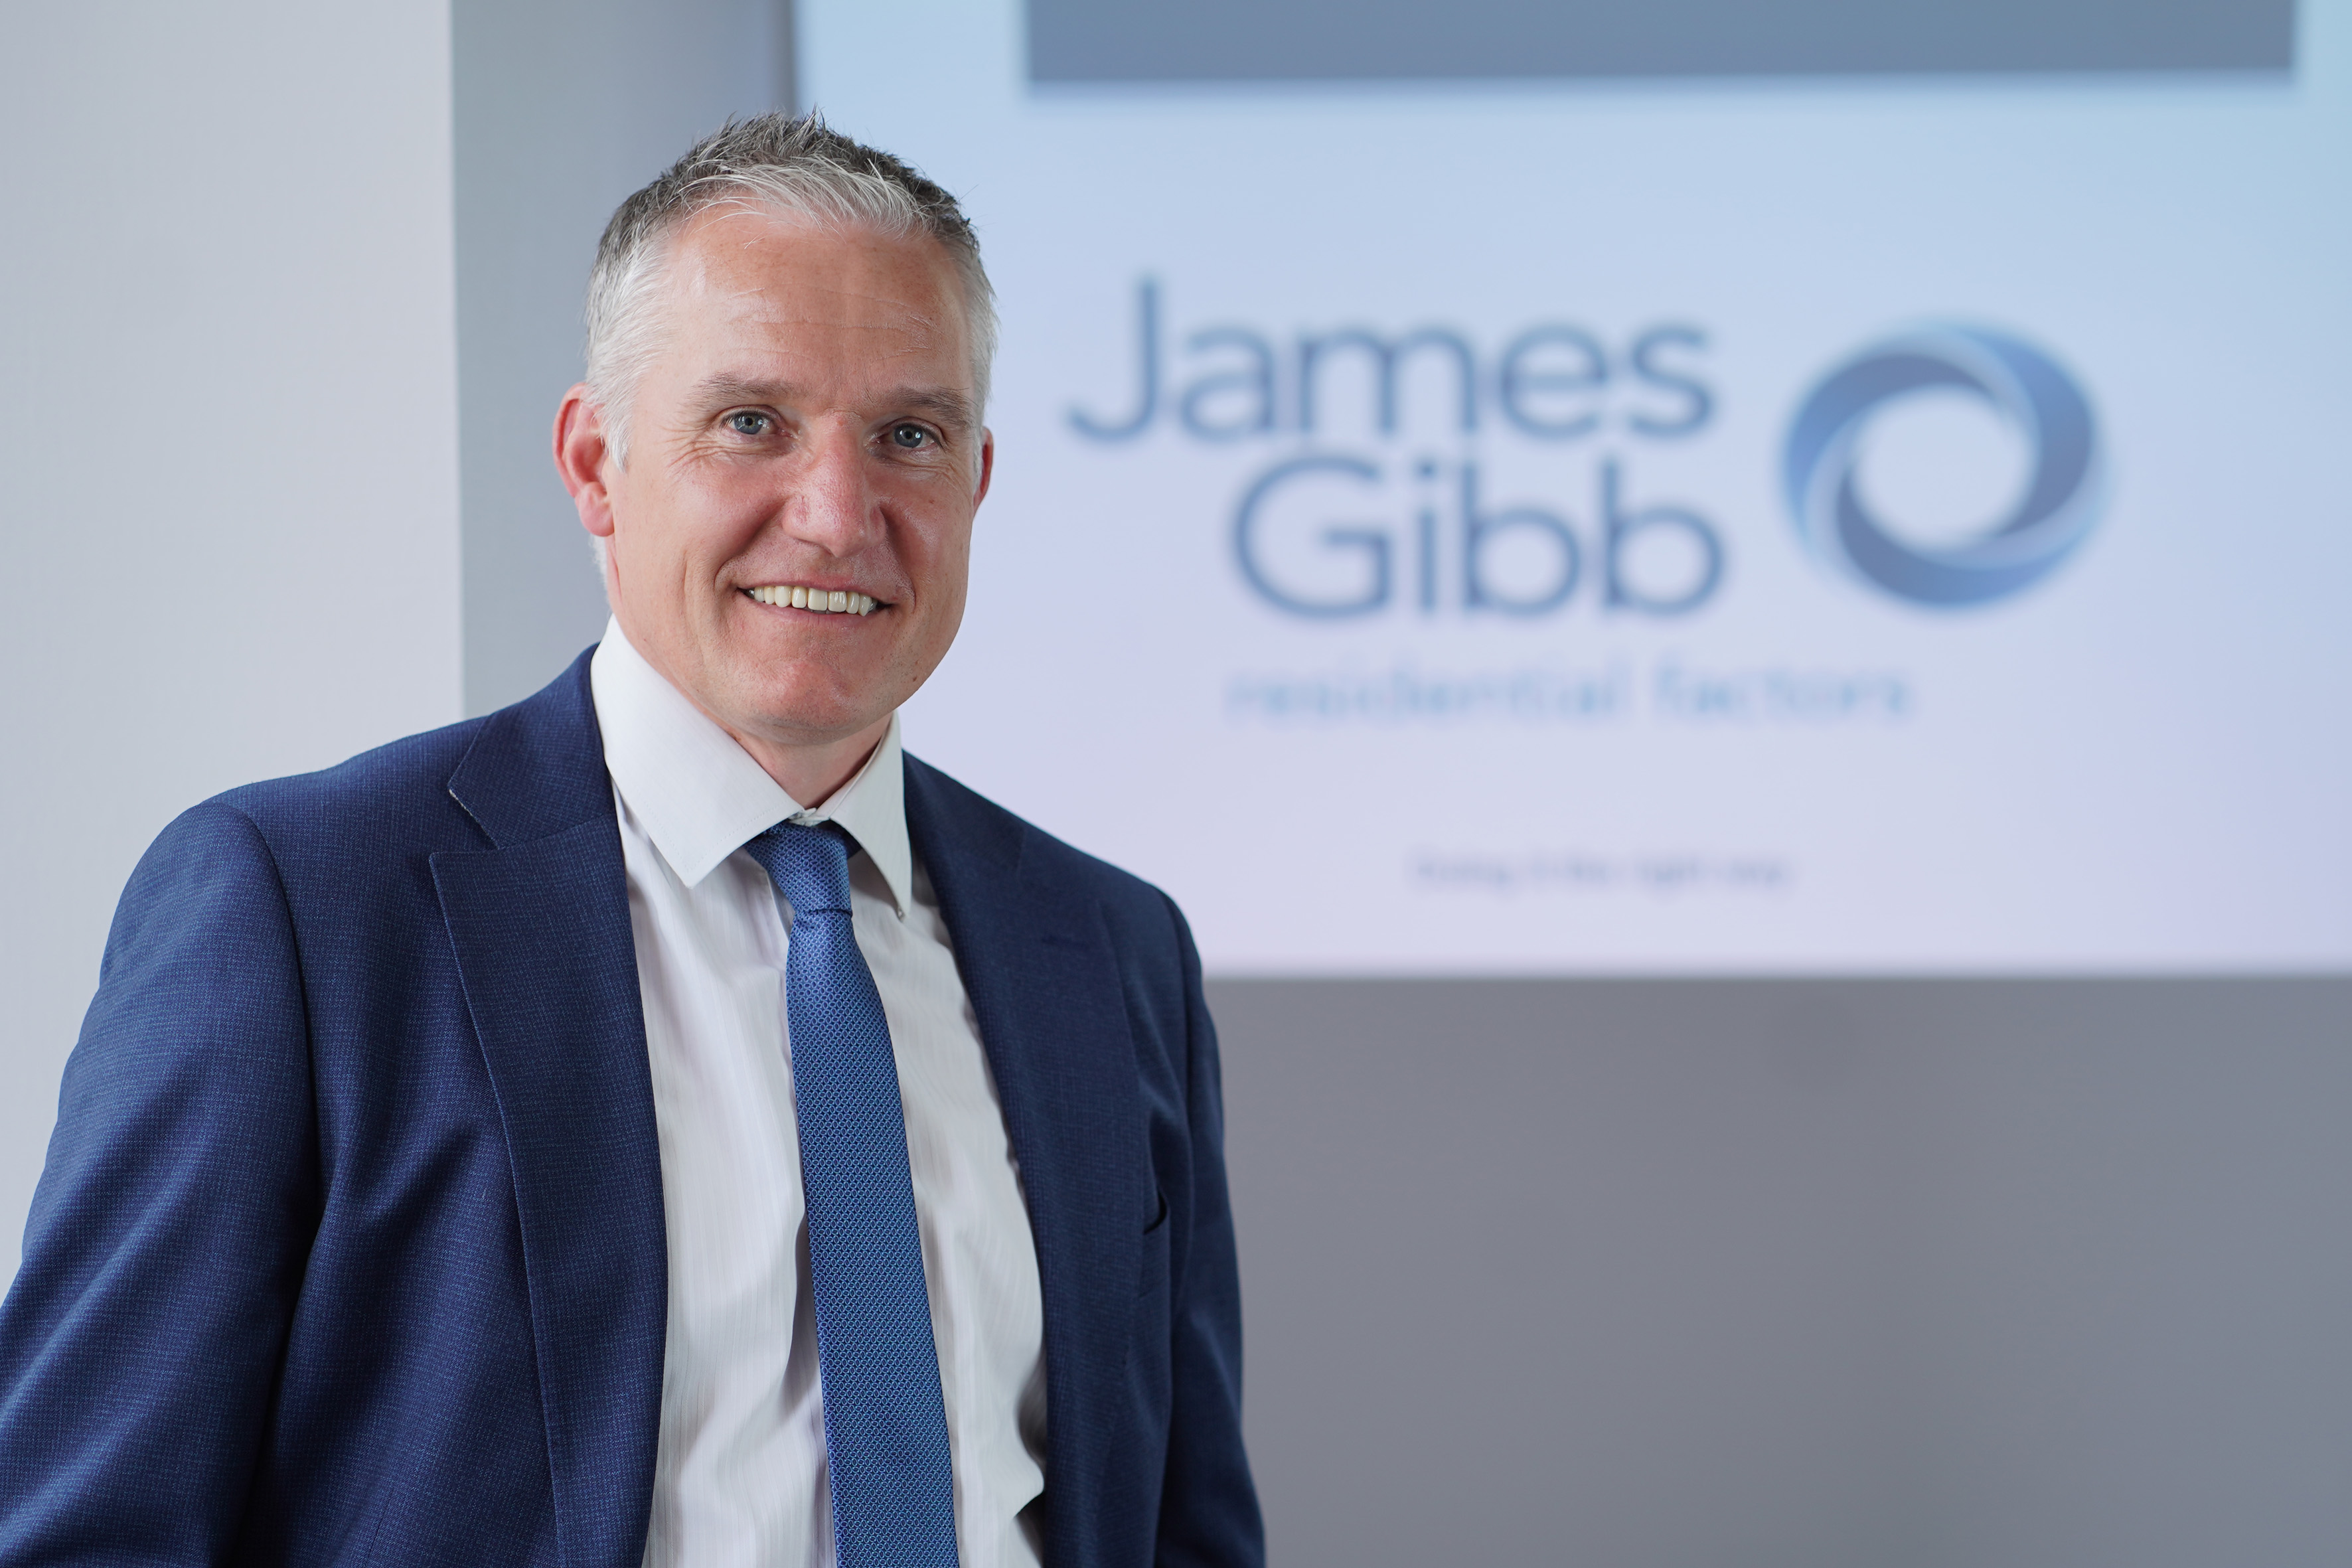 James Gibb acquires J Reavley Factoring Limited for undisclosed sum